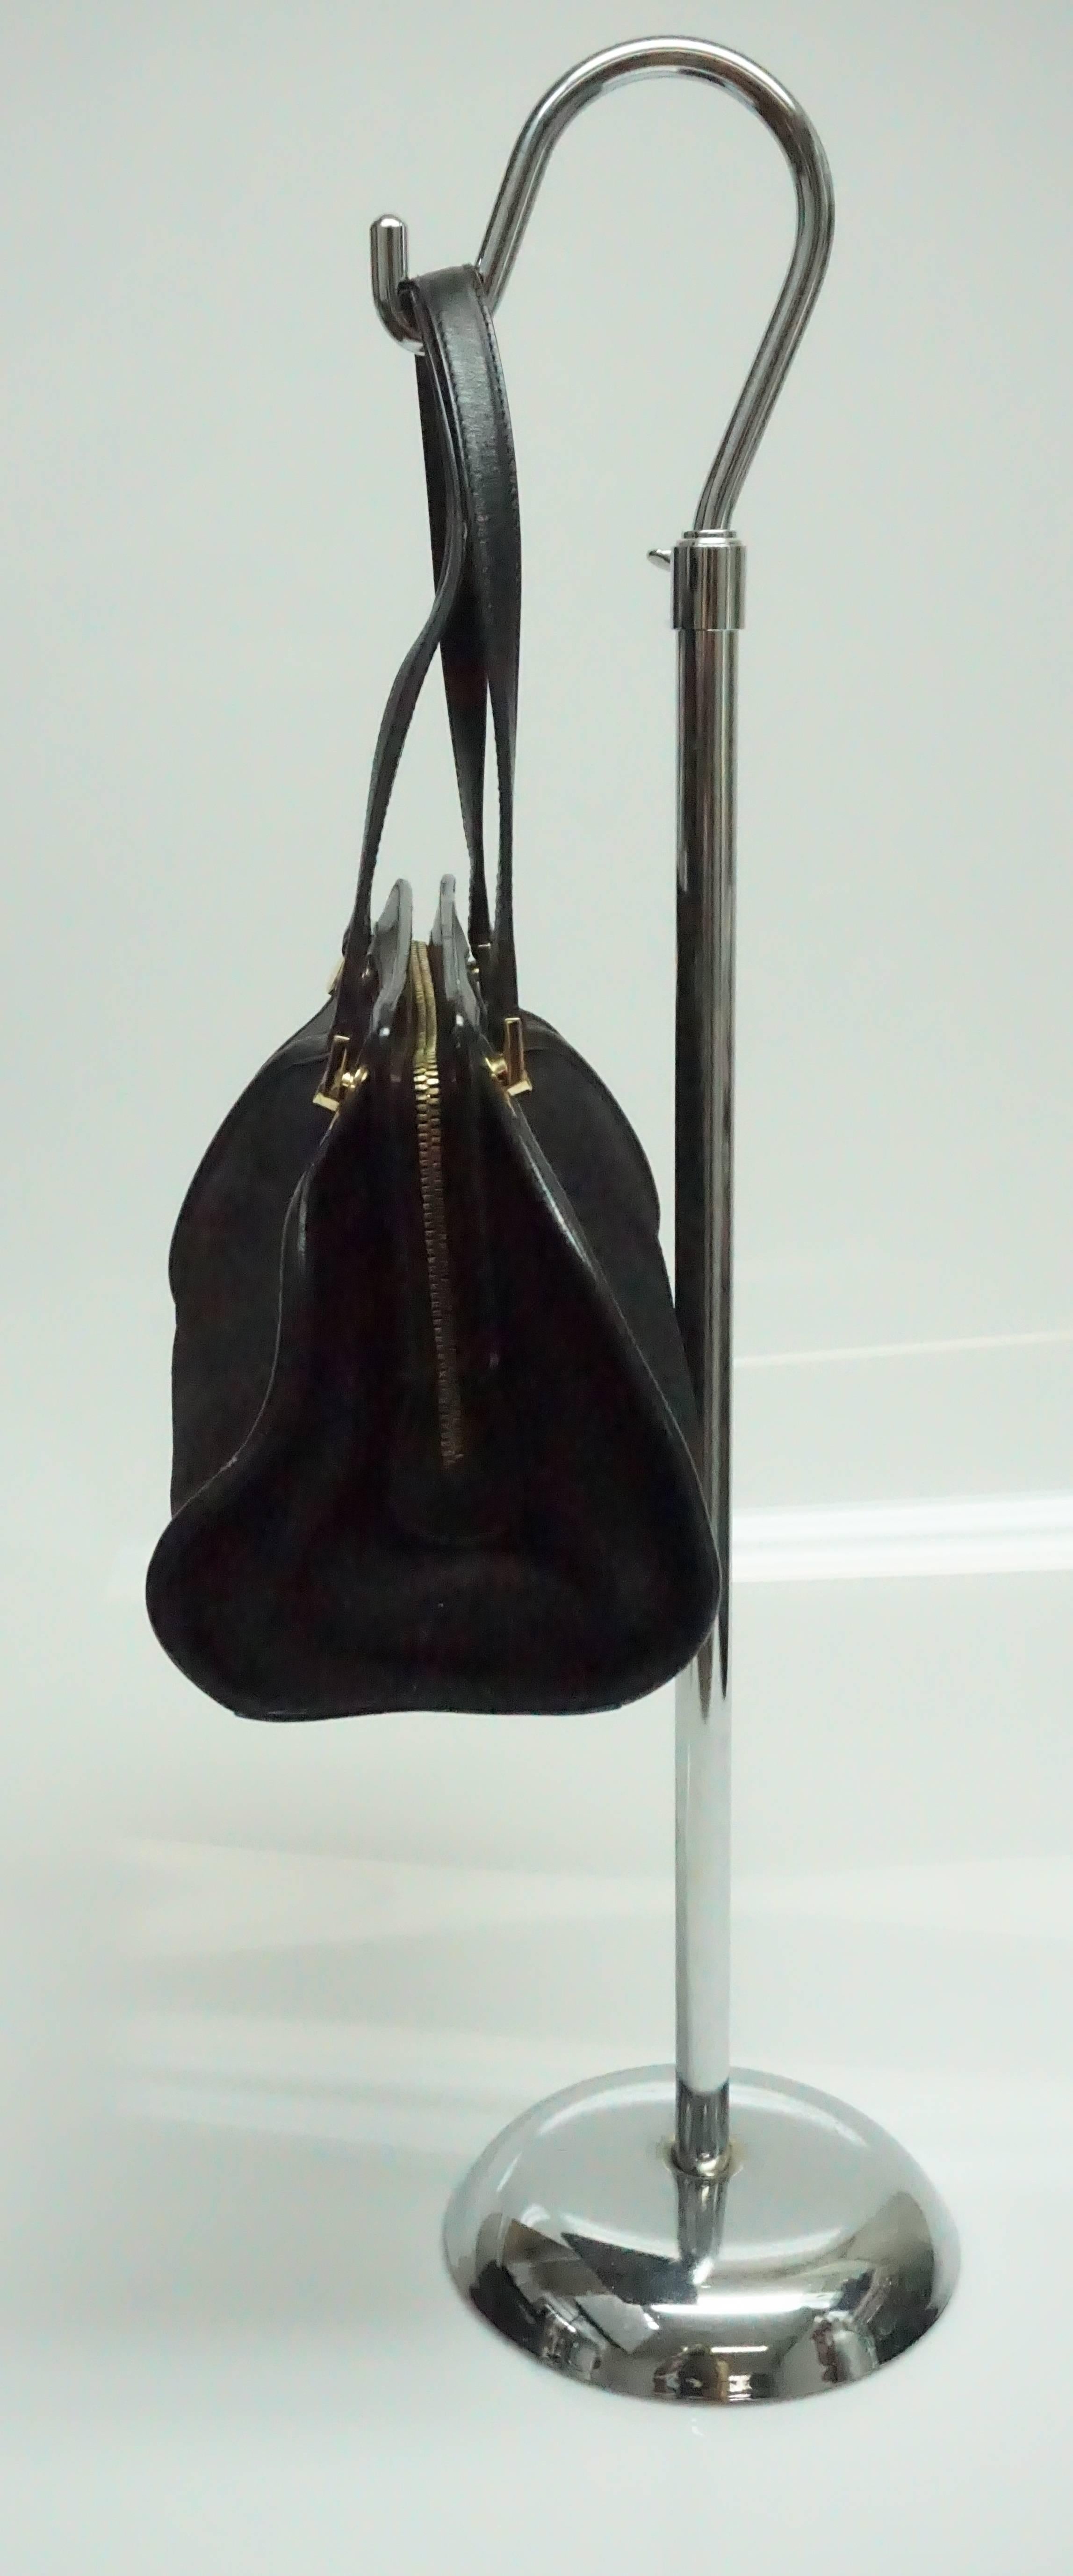 Salvatore Ferragamo Black Suede and Leather Top Handle Handbag  This classic Ferragamo bag is in excellent condition. This purse is mostly black suede with some black leather trimming and gold hardware throughout. The purse has a gold zipper to open